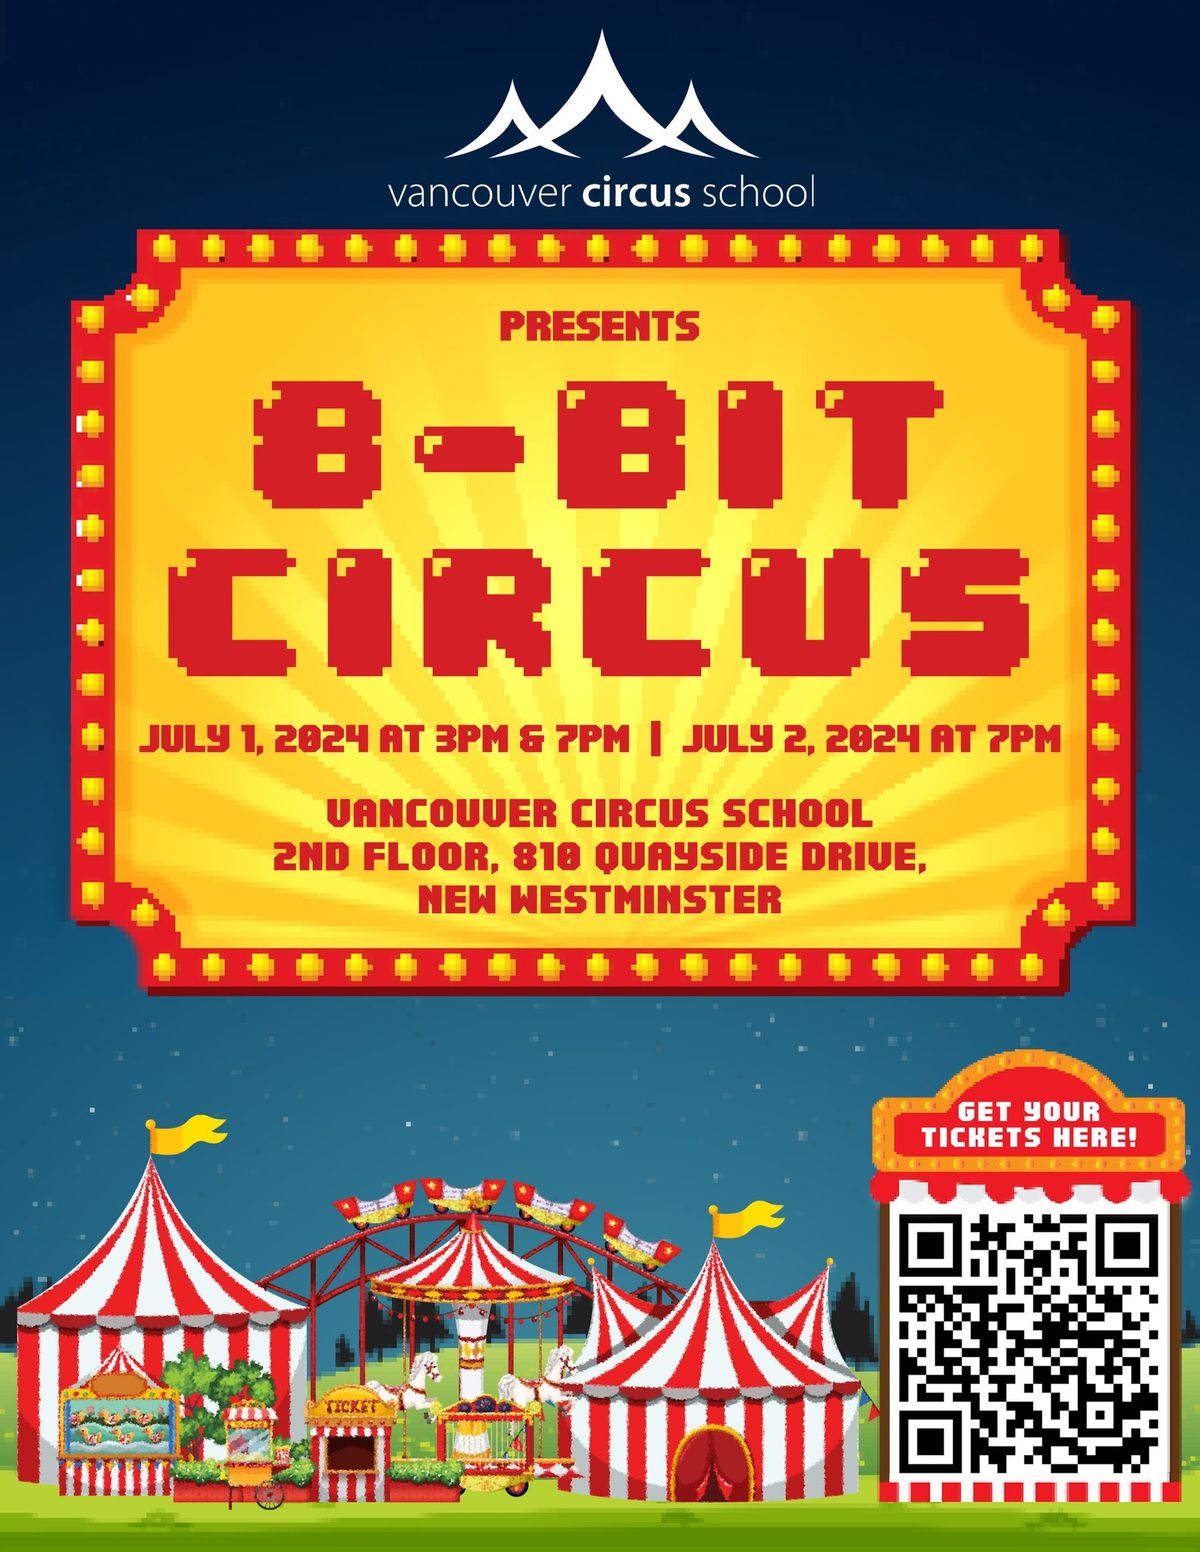 8-Bit Circus Show by Vancouver Circus School